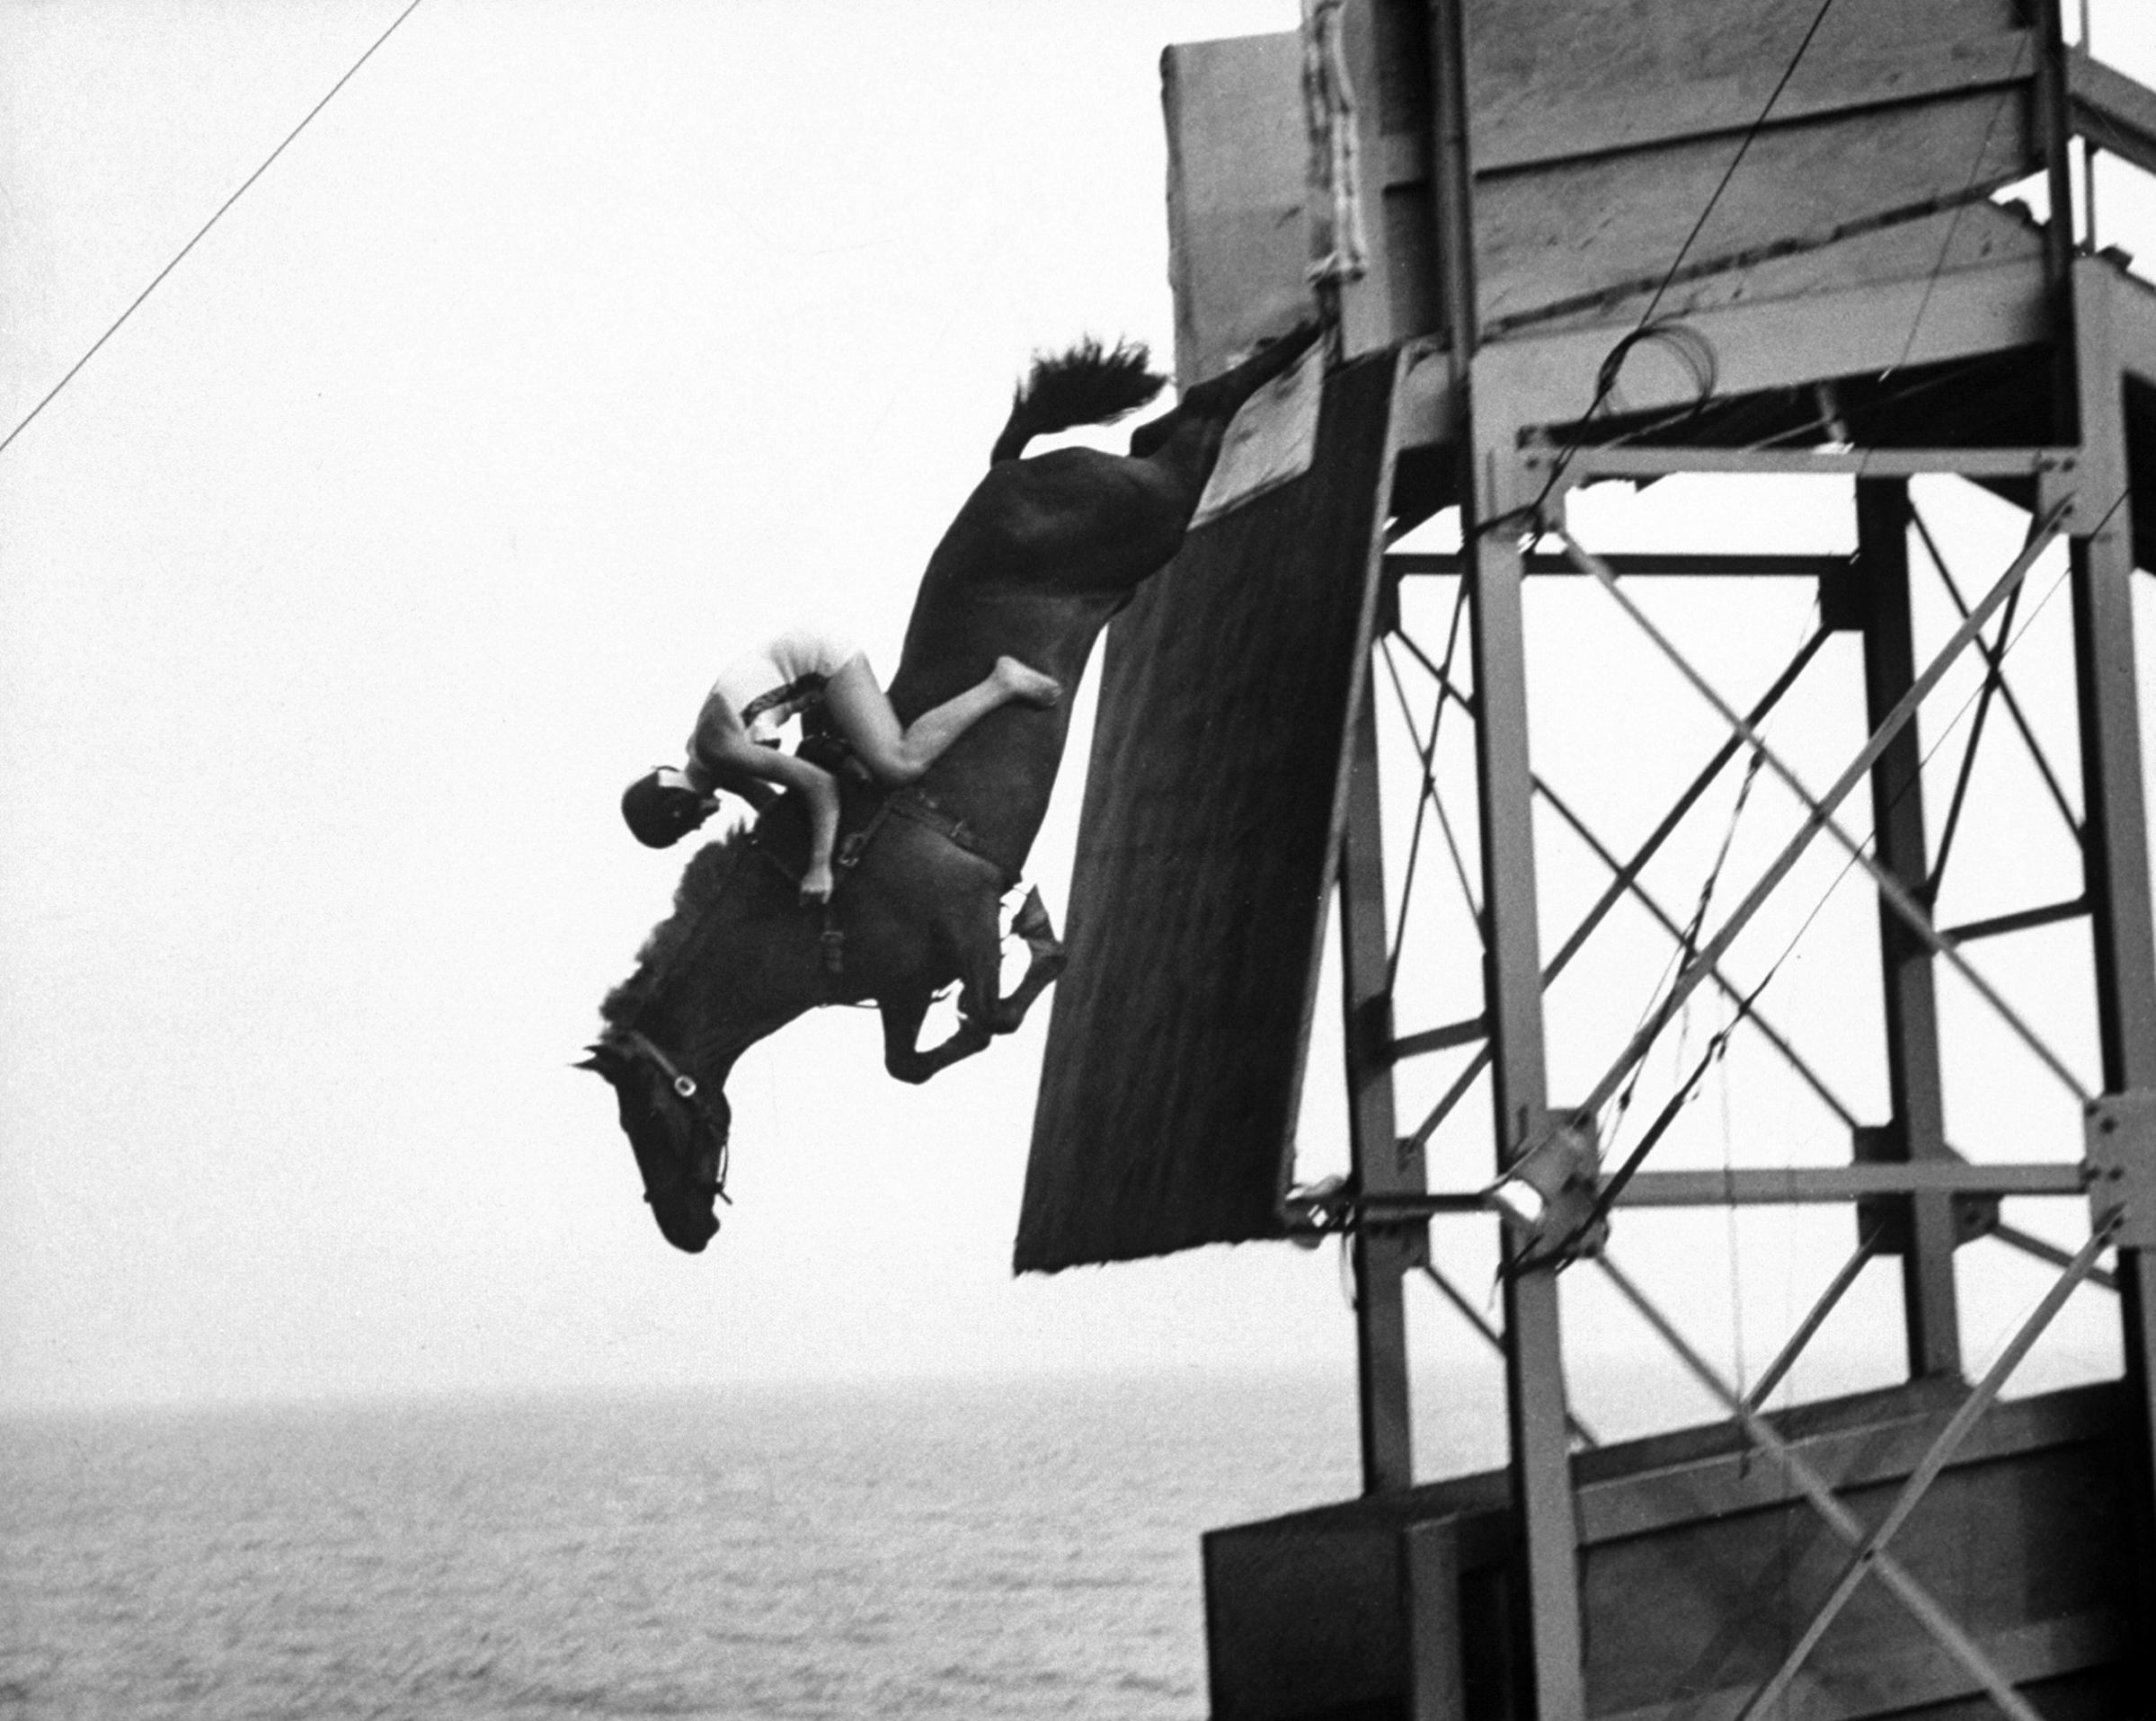 In mid air the horse sails gracefully toward the tank, 1953.